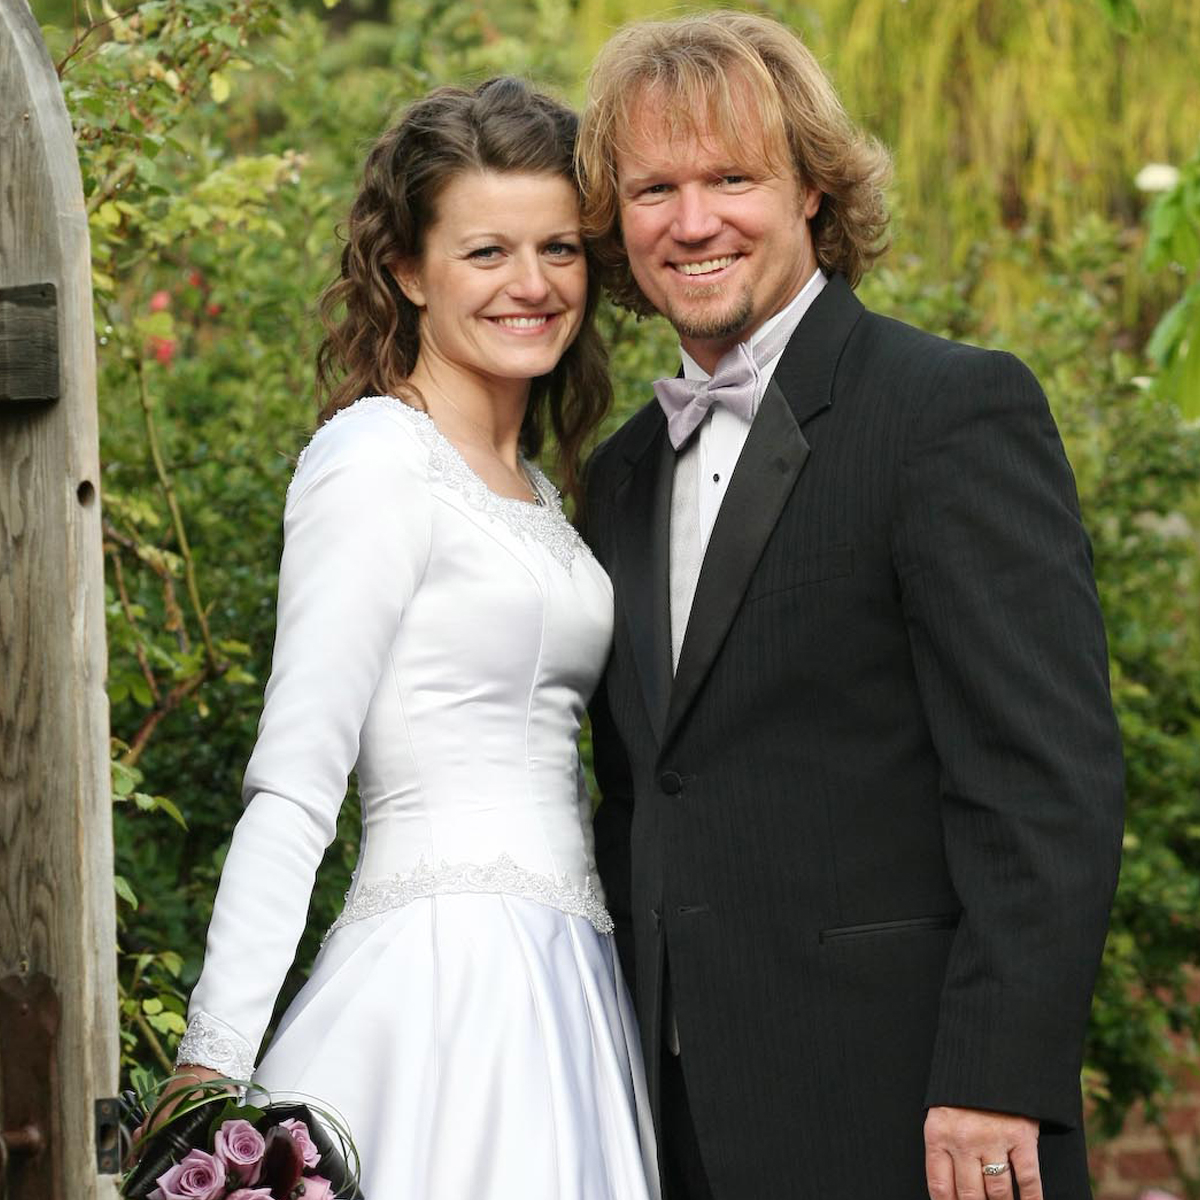 Who Died on 'Sister Wives'?